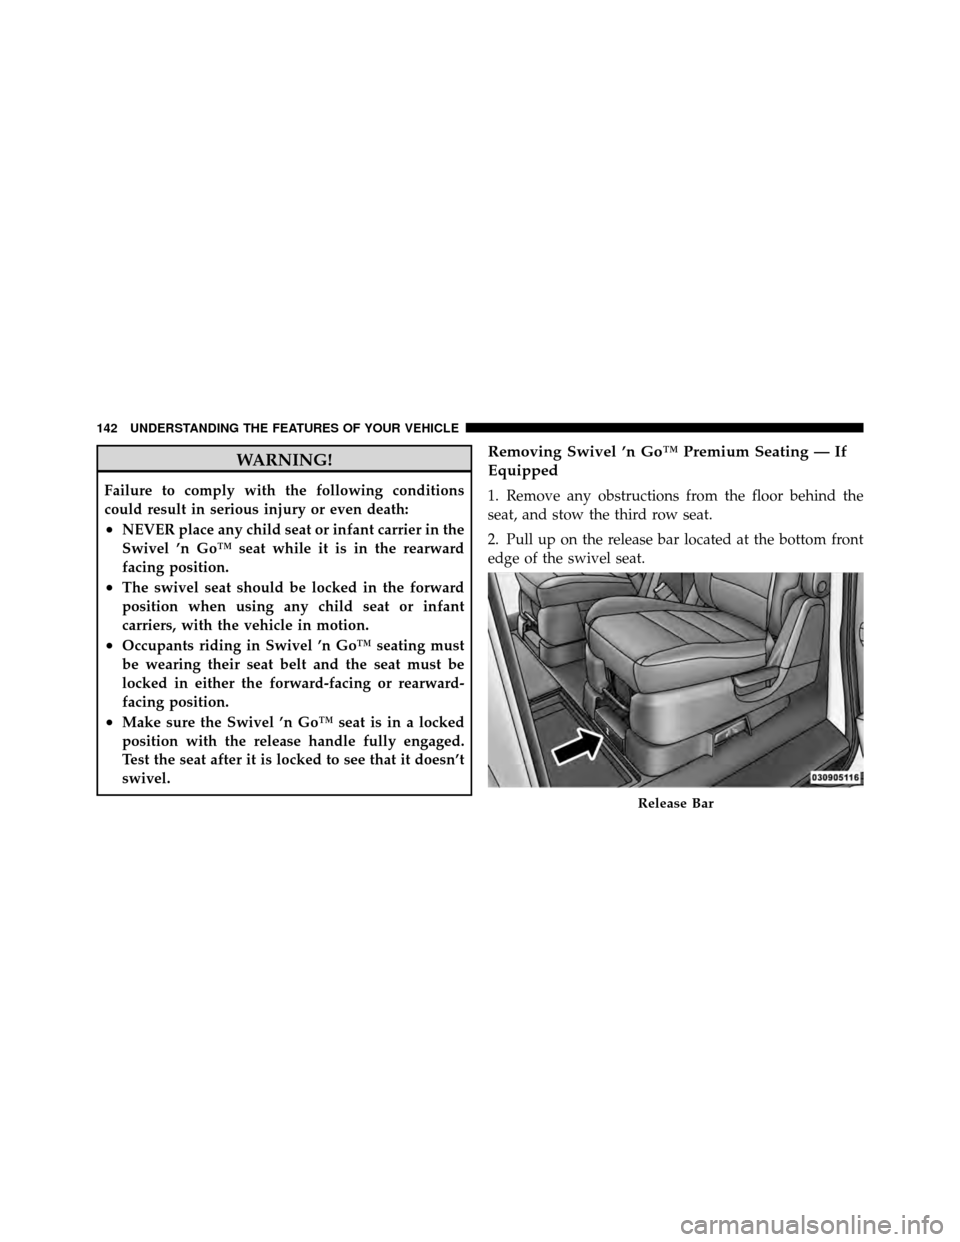 CHRYSLER TOWN AND COUNTRY 2010 5.G Owners Manual WARNING!
Failure to comply with the following conditions
could result in serious injury or even death:
•NEVER place any child seat or infant carrier in the
Swivel ’n Go™ seat while it is in the 